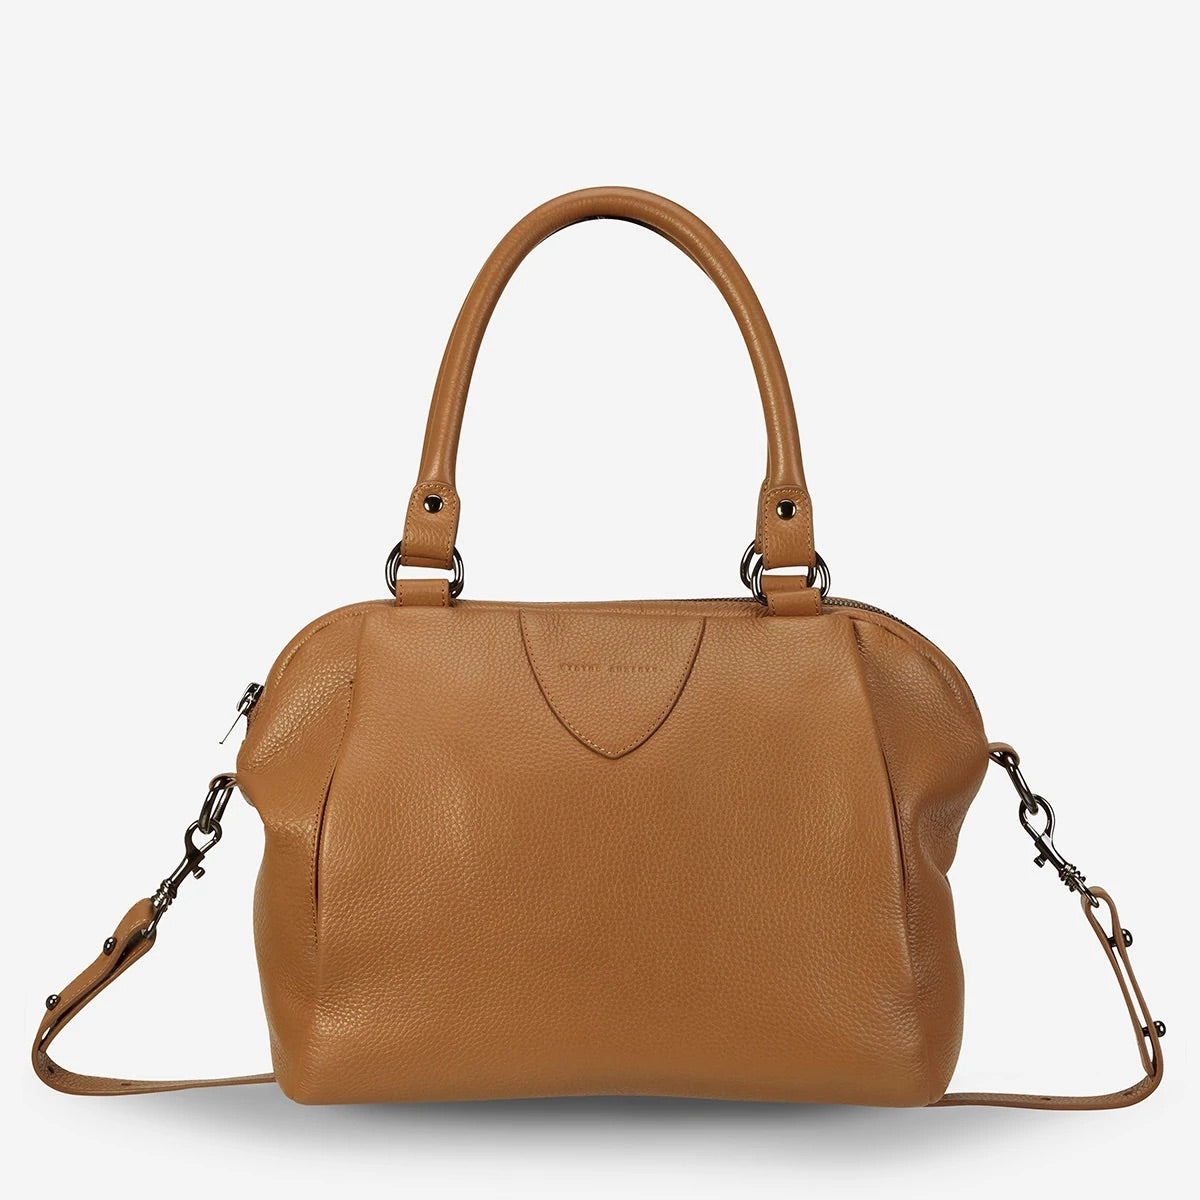 Force of Being Women’s Large Leather Bag